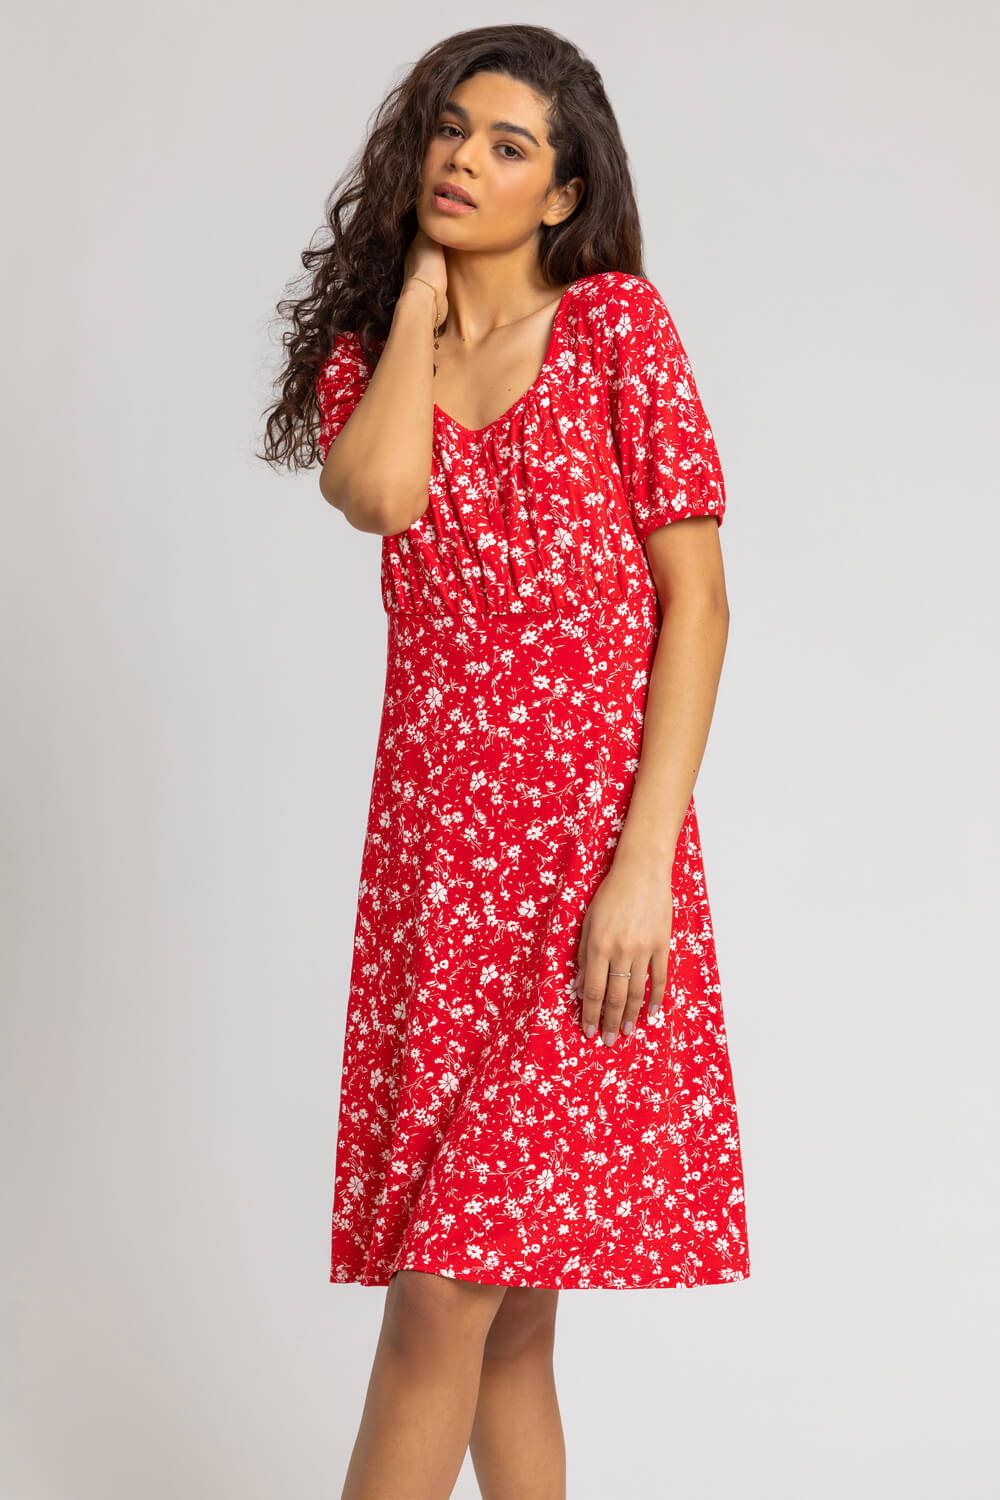 Red Stretch Floral Print Fit & Flare Dress, Image 5 of 5